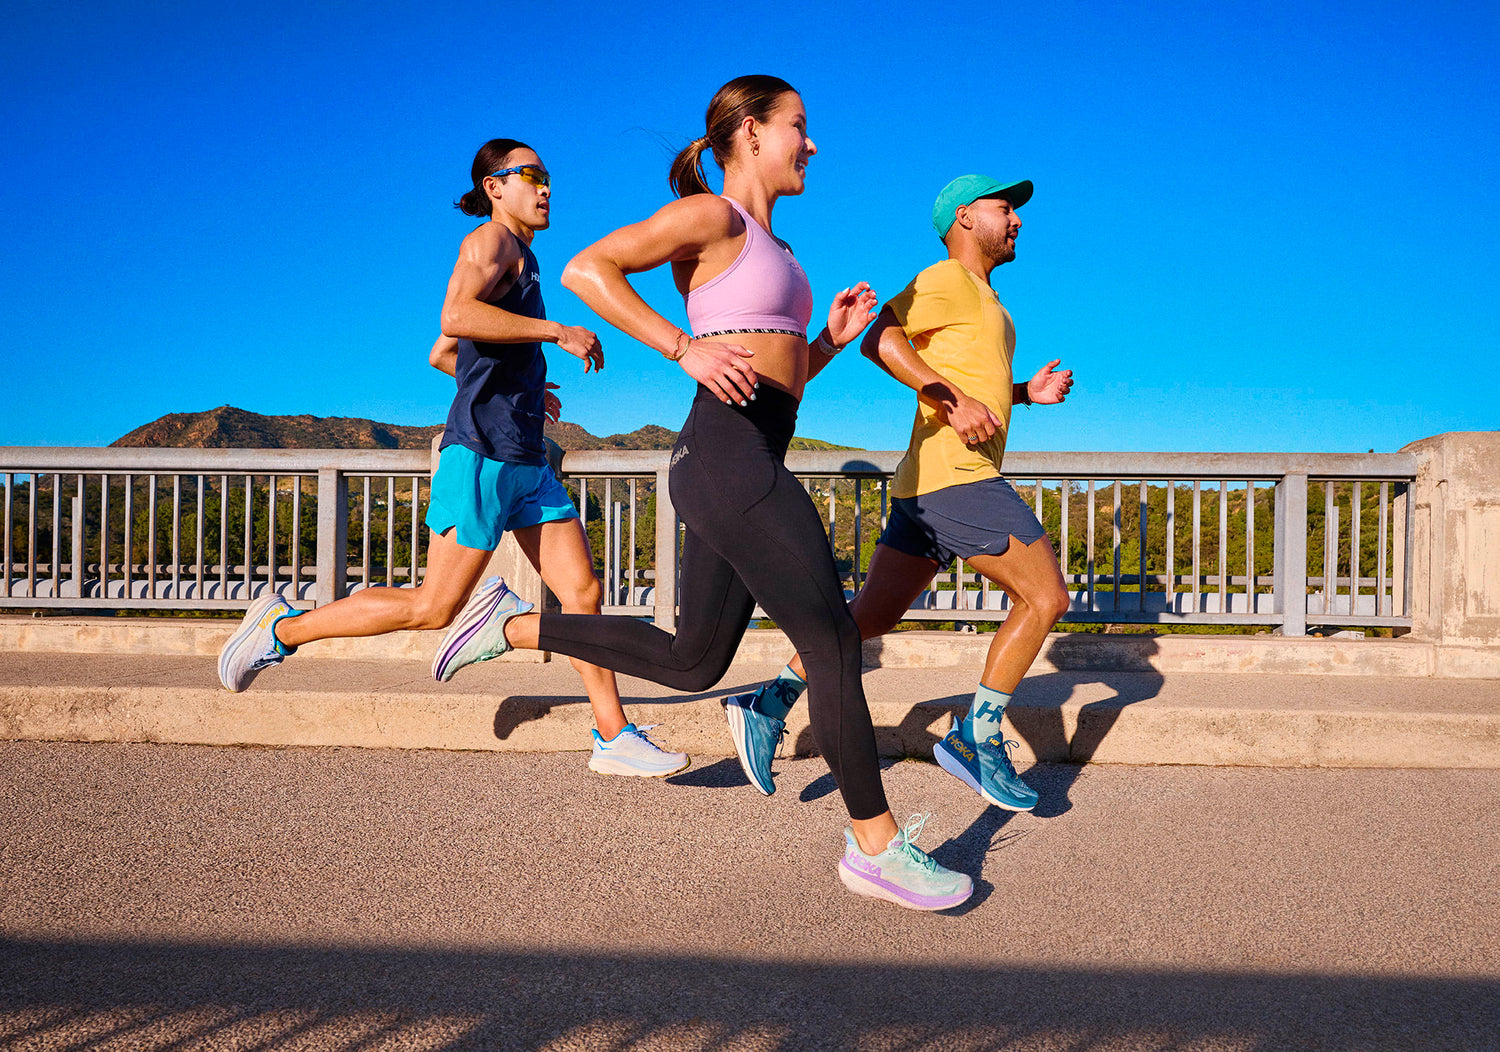 Summer is Sizzling and so are these 2023 California Running Trends